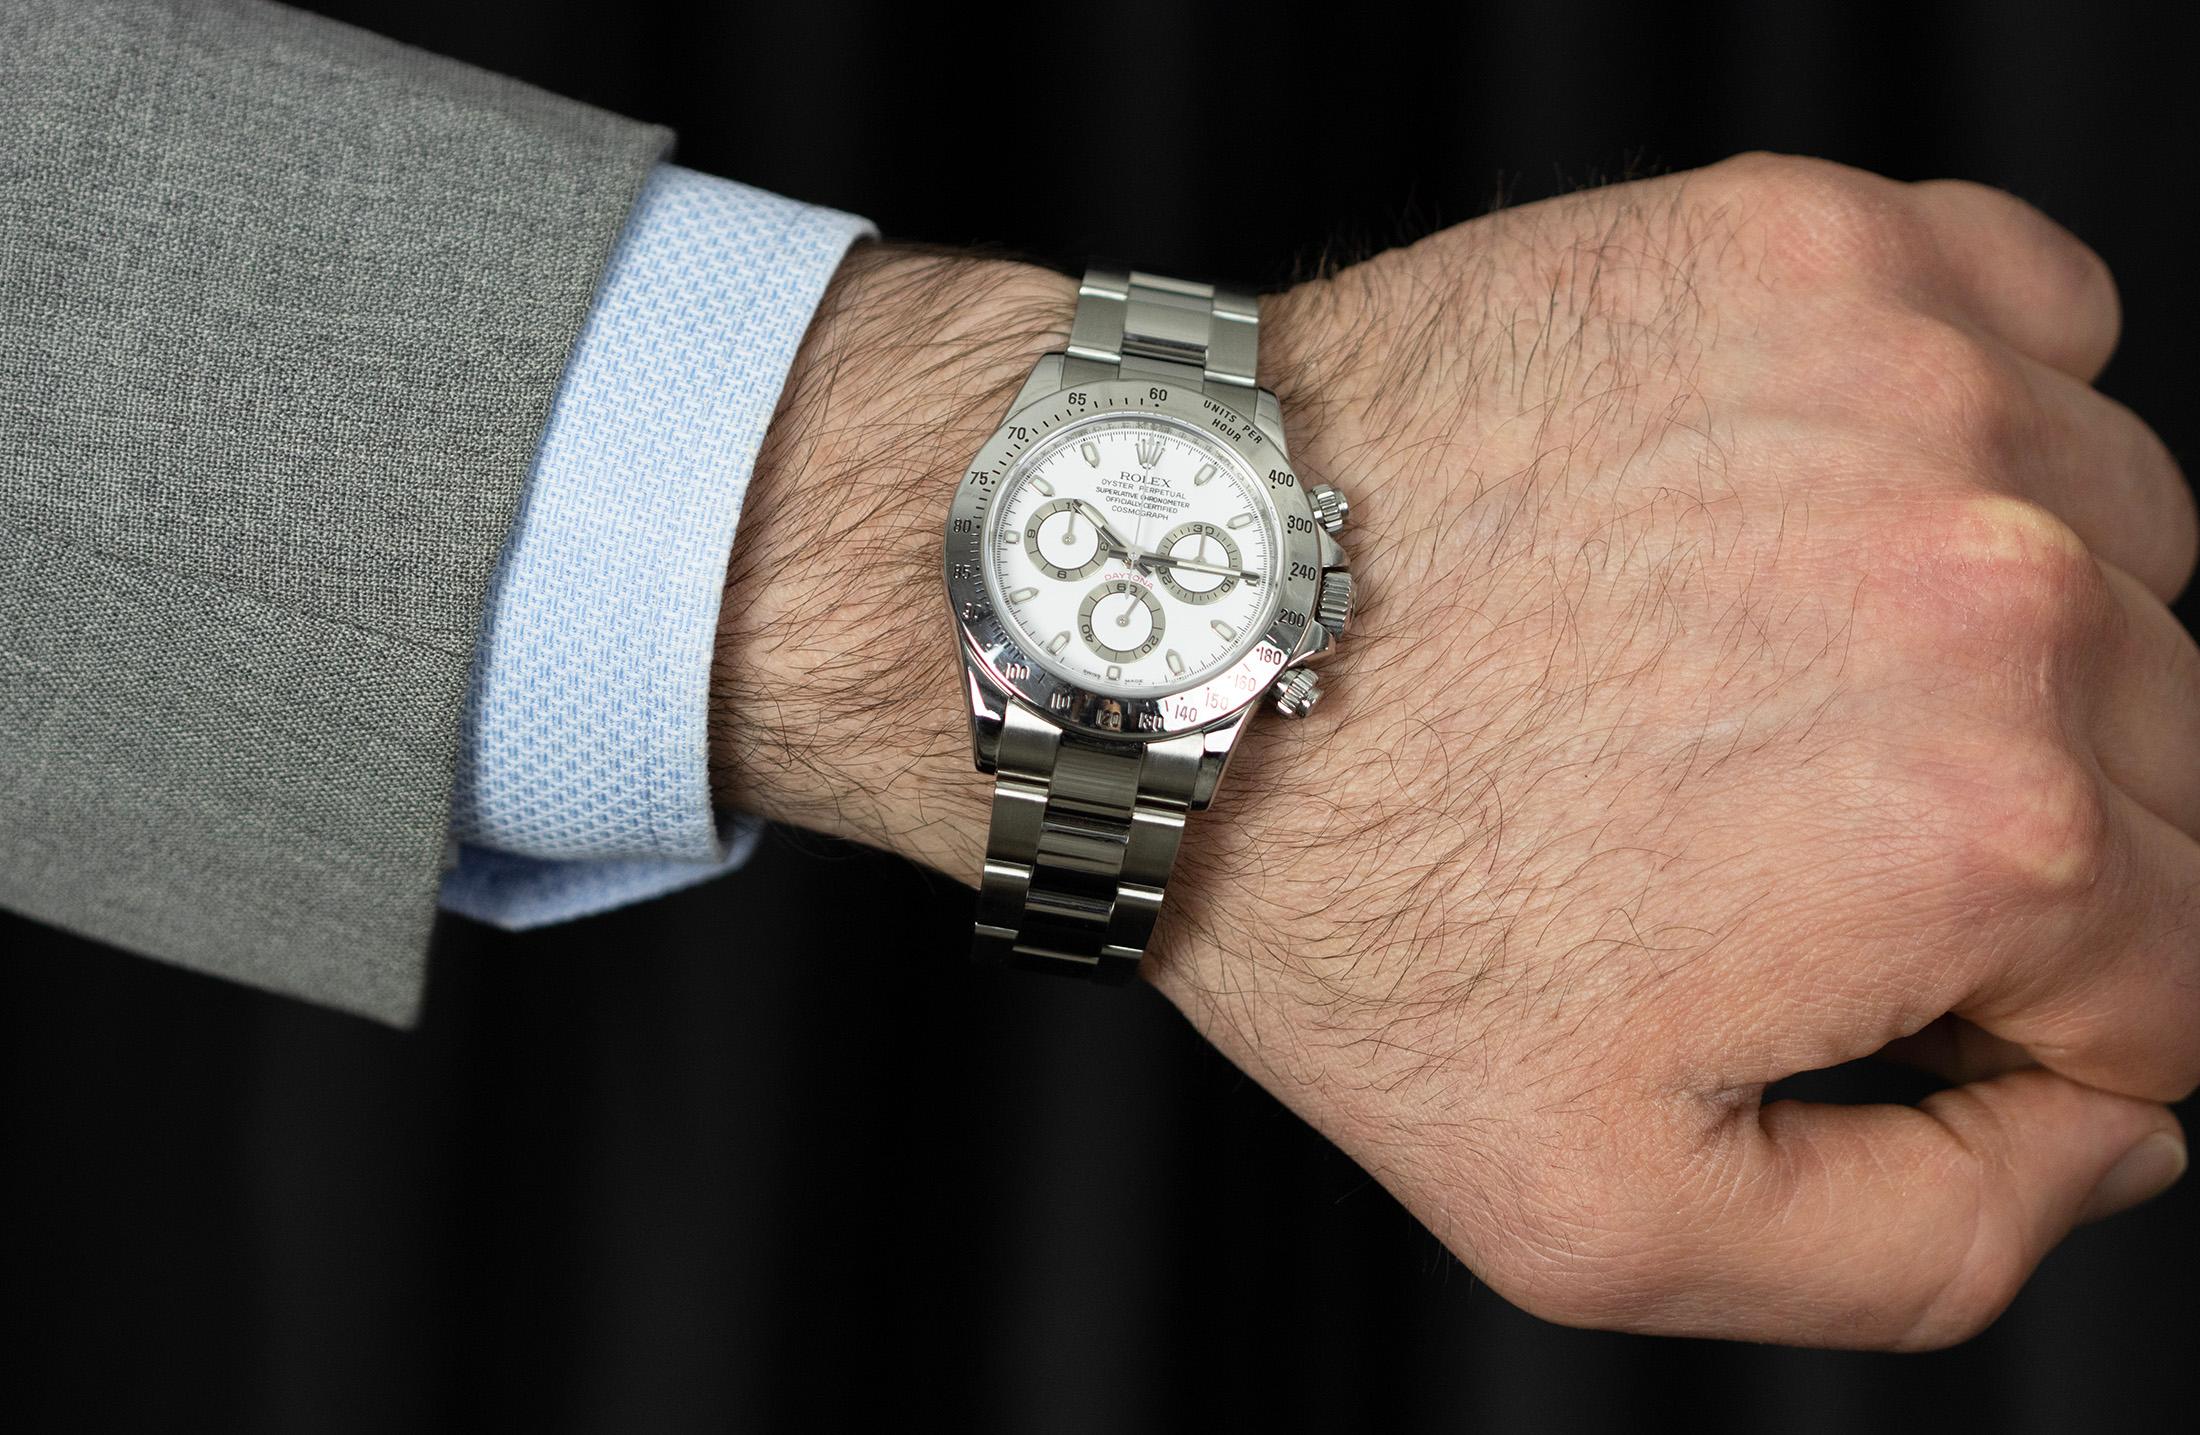 Rolex Daytona Ref-116520 Iconic White Dial Stainless Steel Cosmograph Wristwatch 4